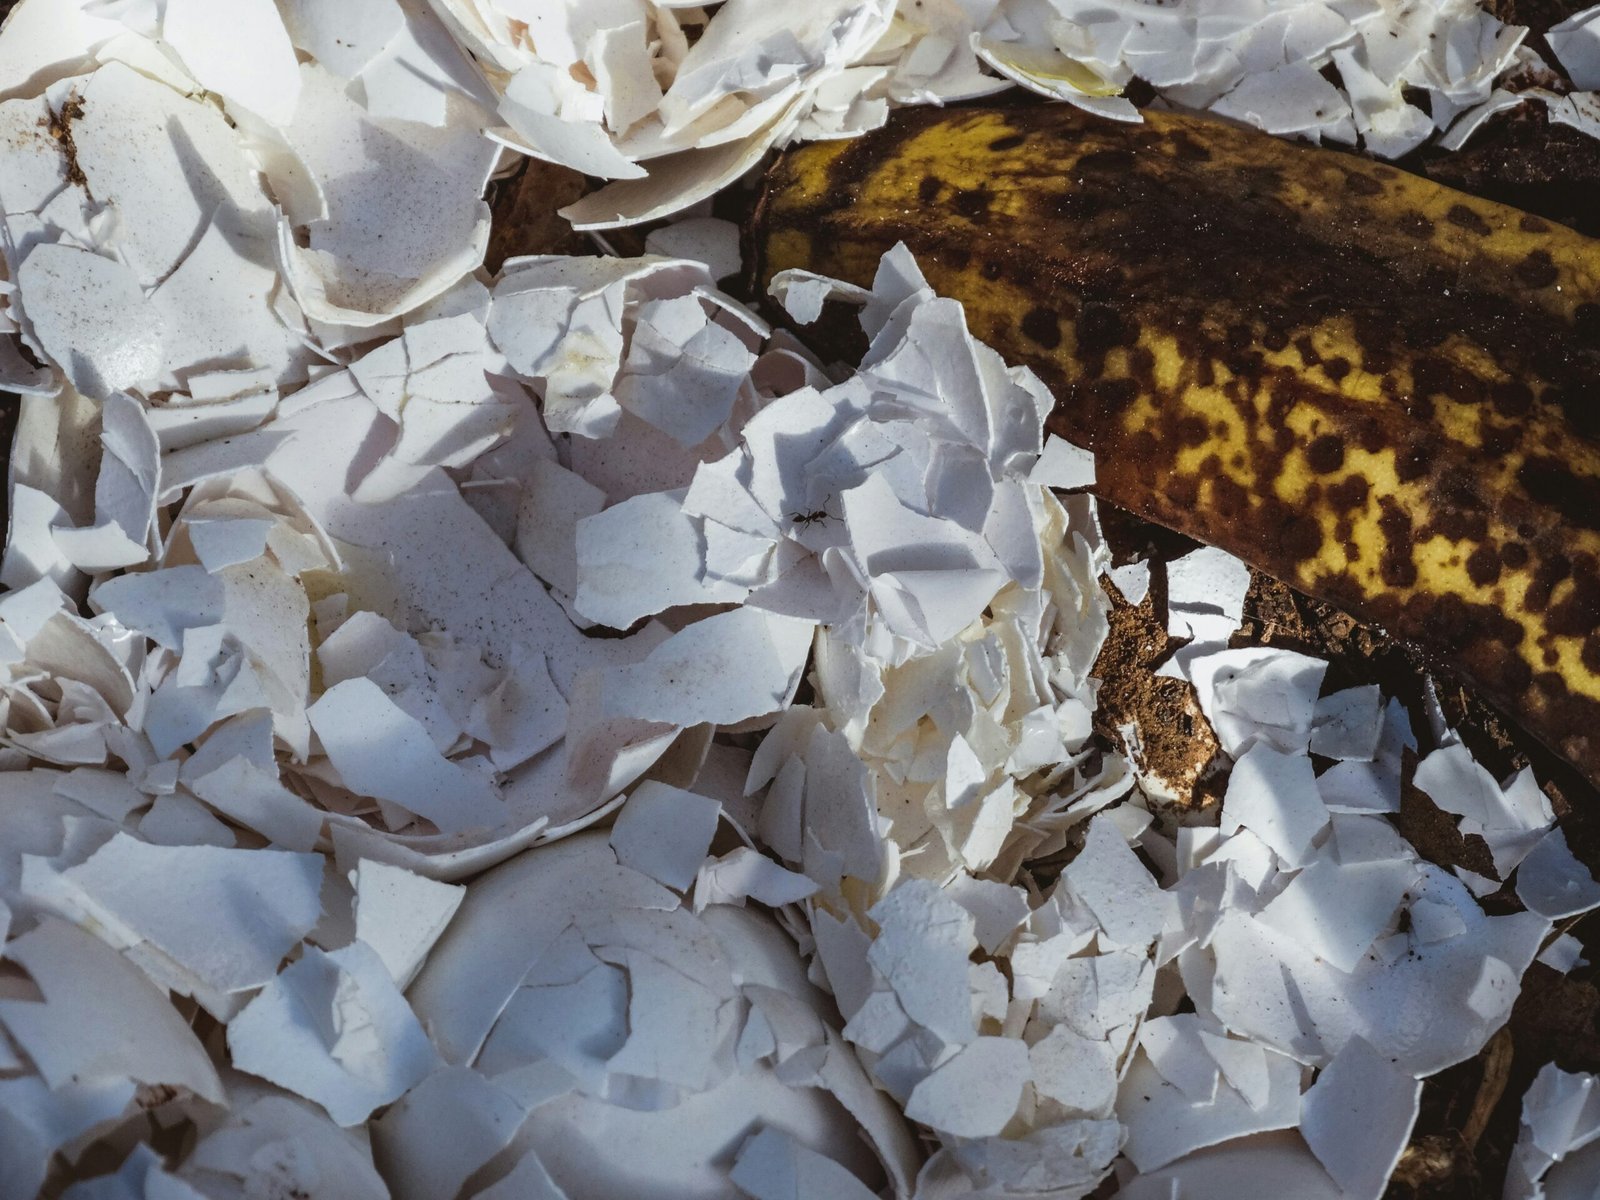 a banana sitting on top of a pile of shredded paper